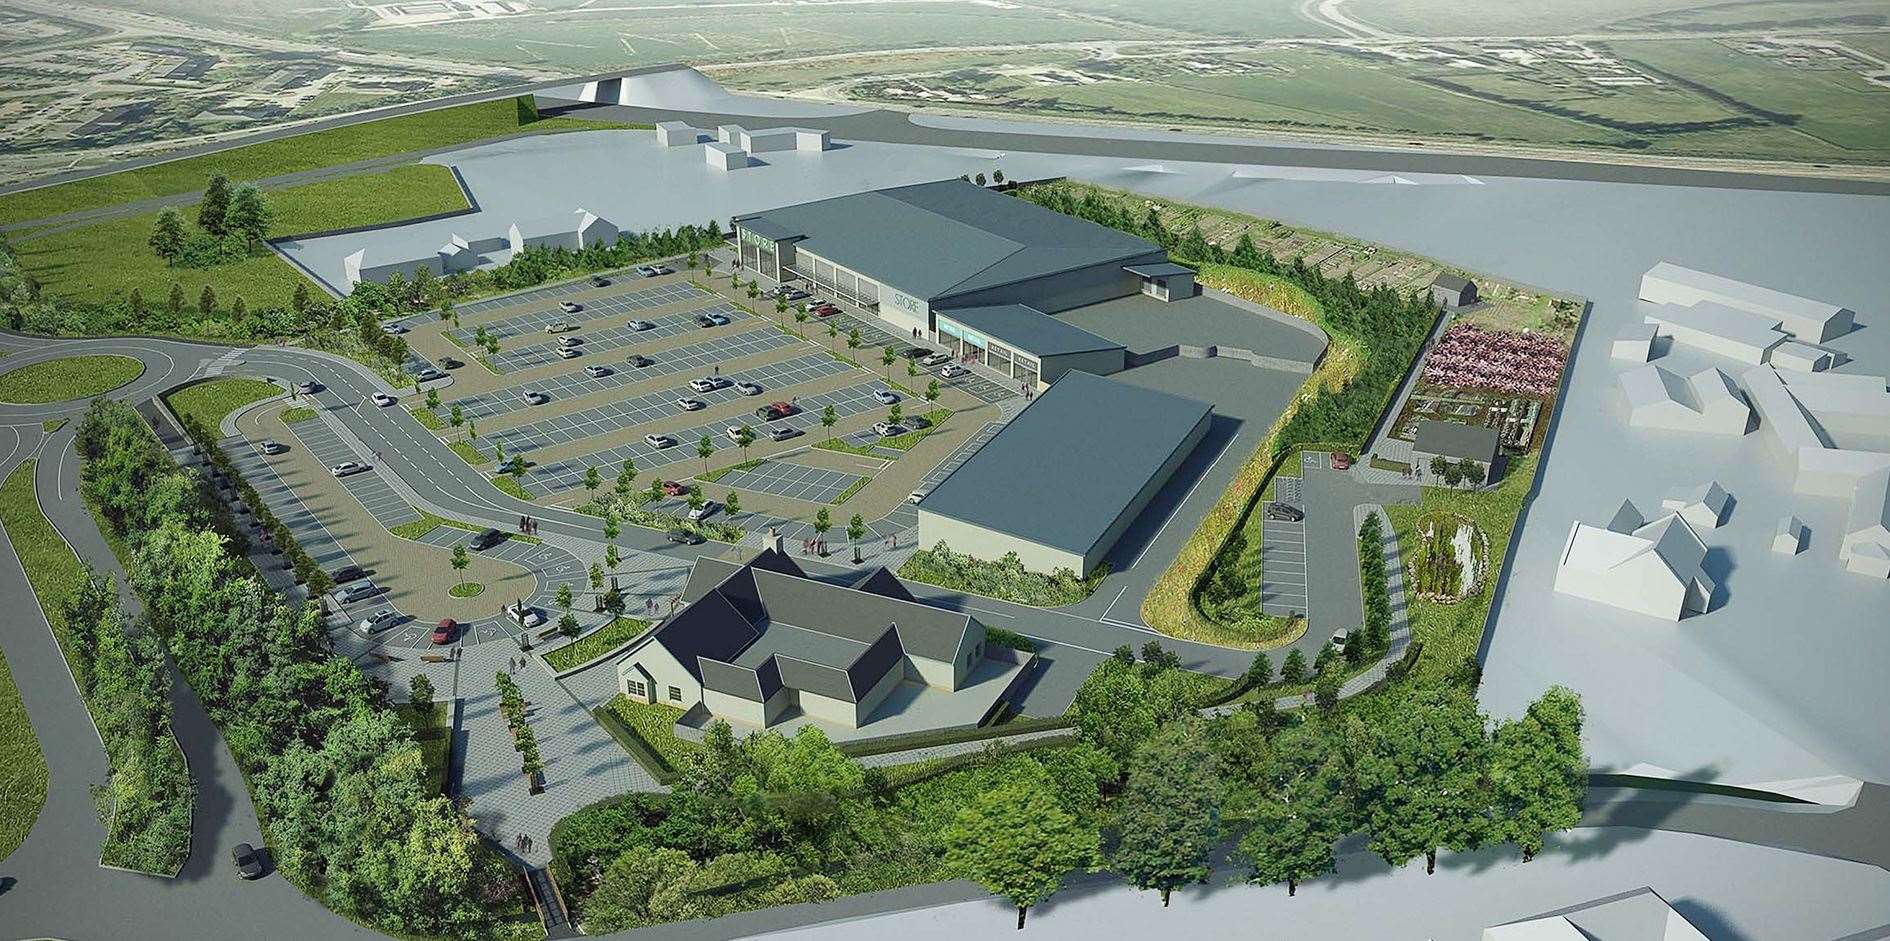 Developers sought to extend planning permission for major expansion of the Inshes Retail Park in Inverness.